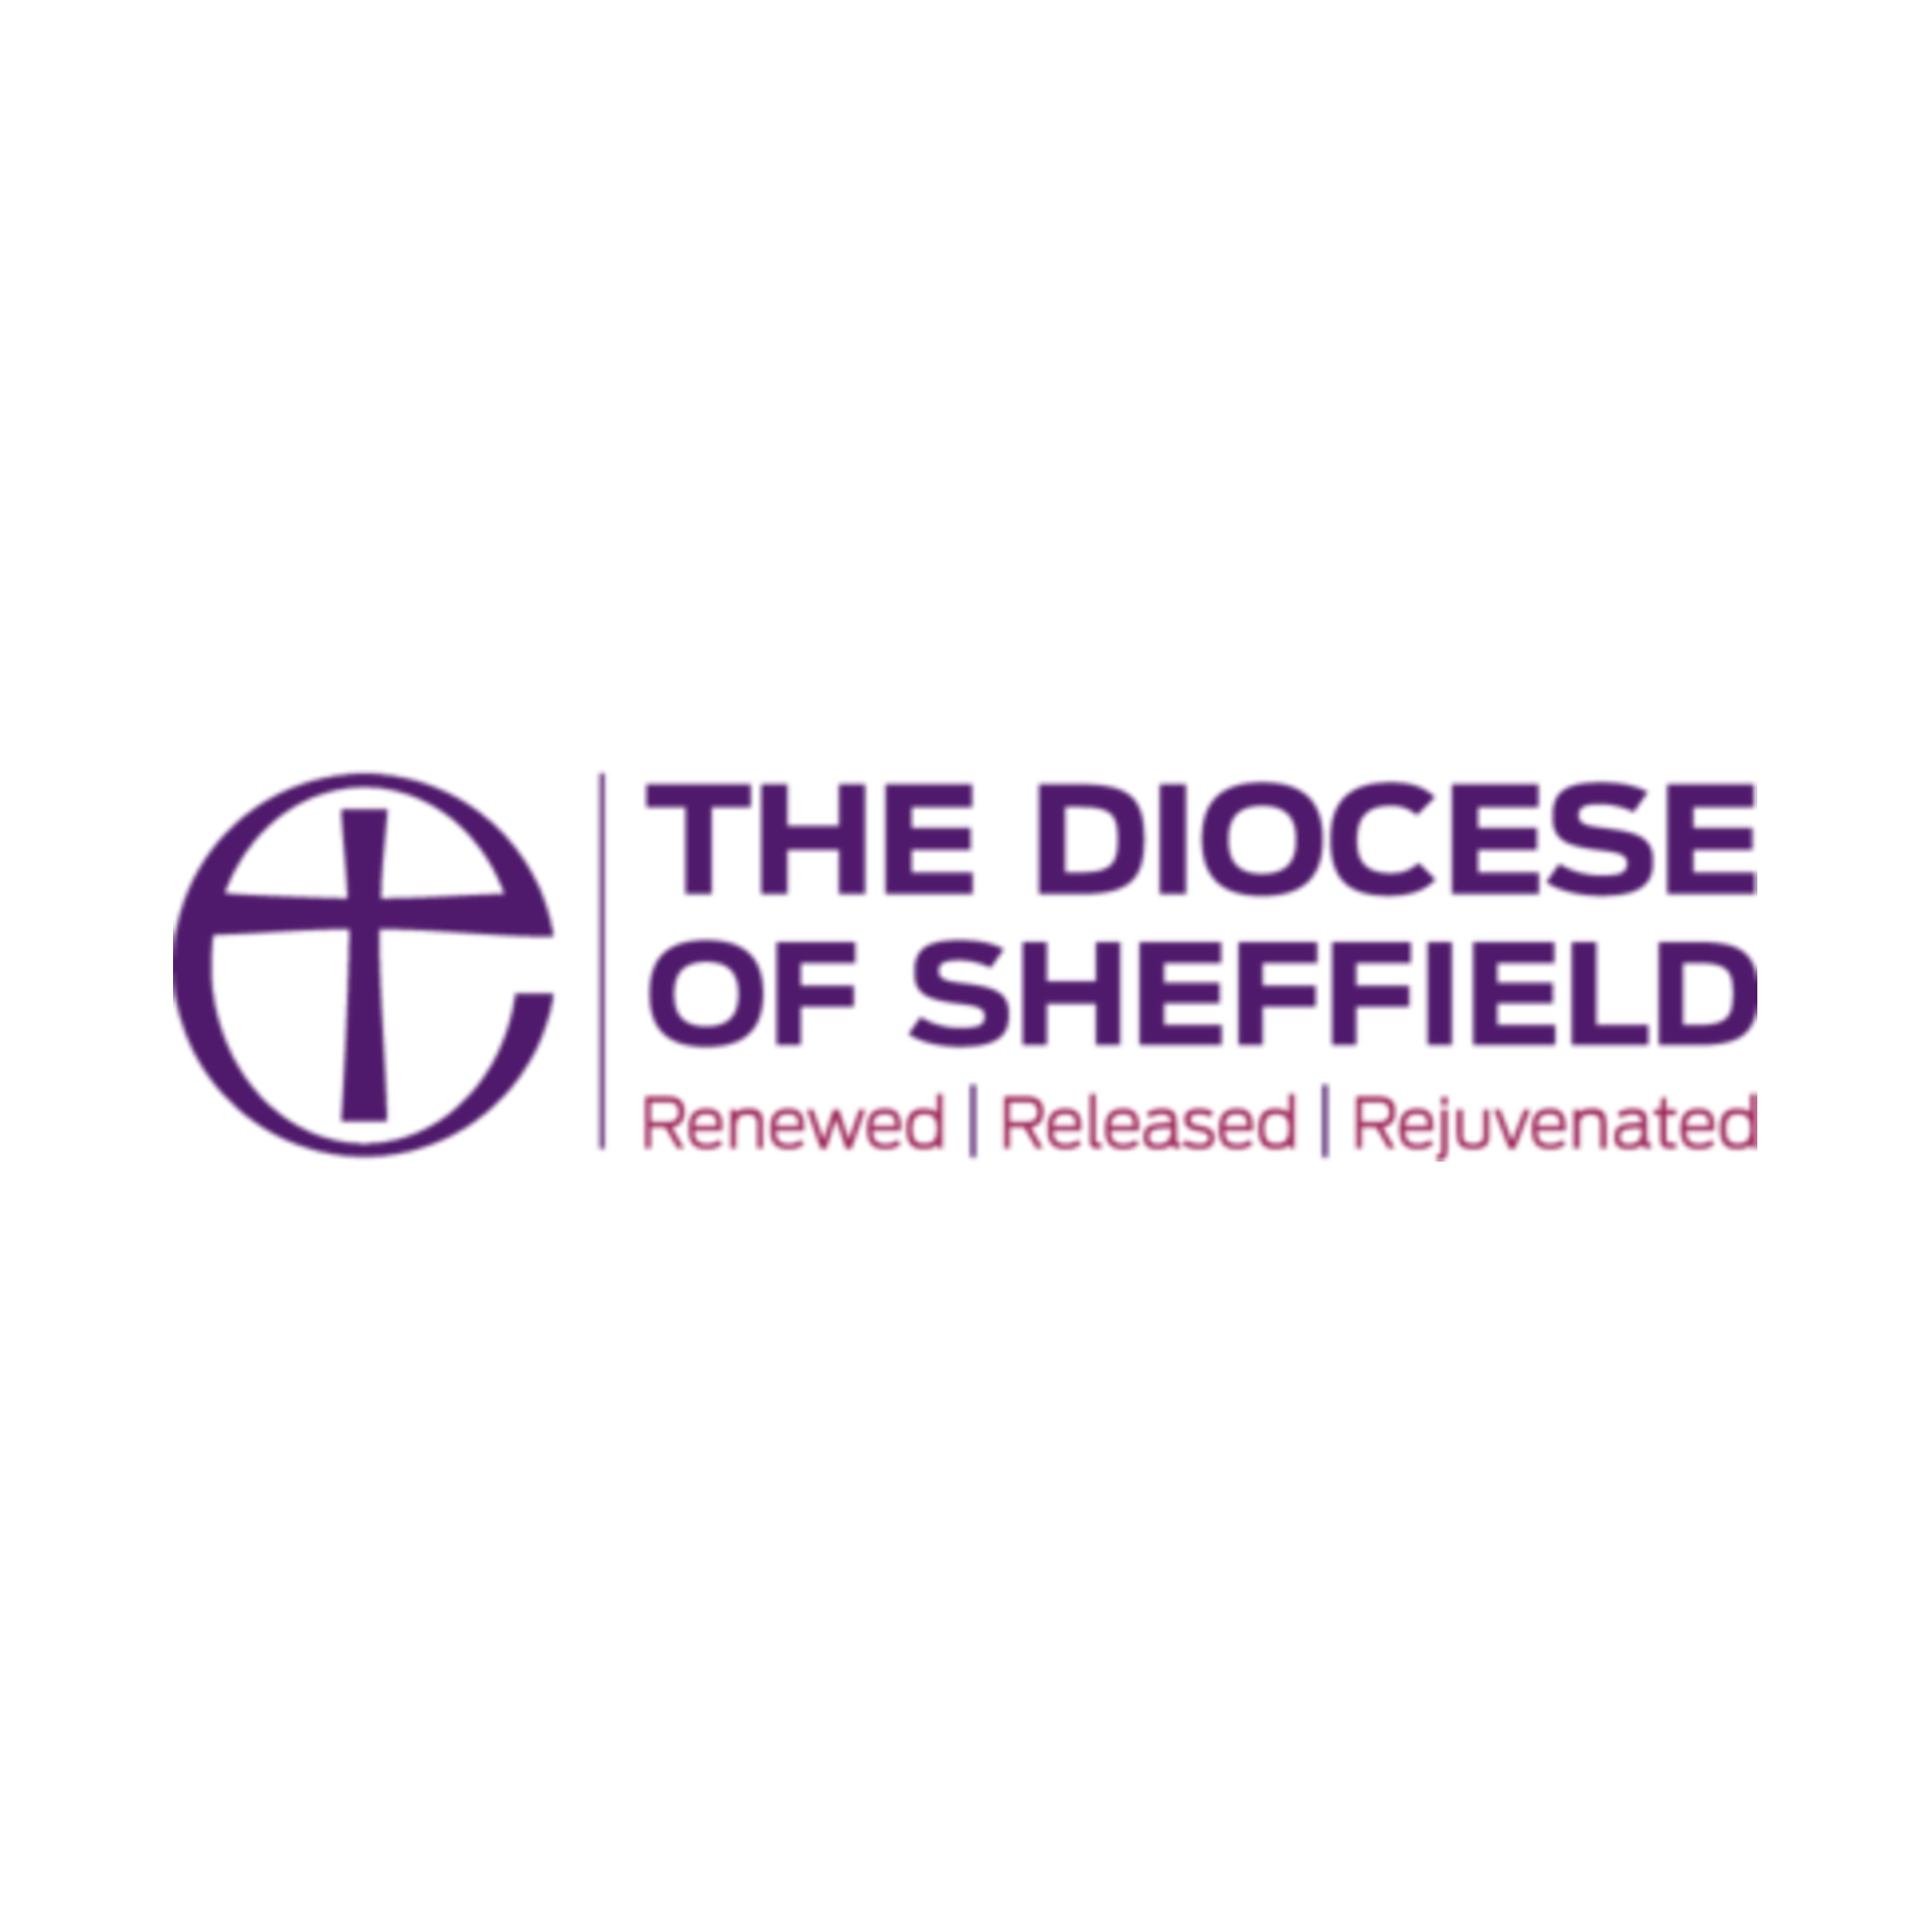 Diocese of Sheffield logo